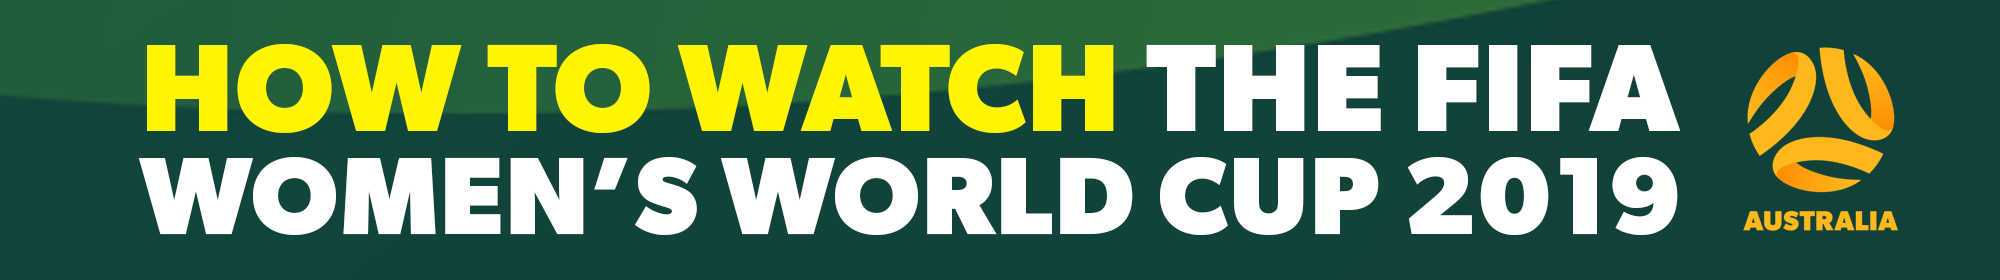 How to Watch FIFA Women's World Cup 2019